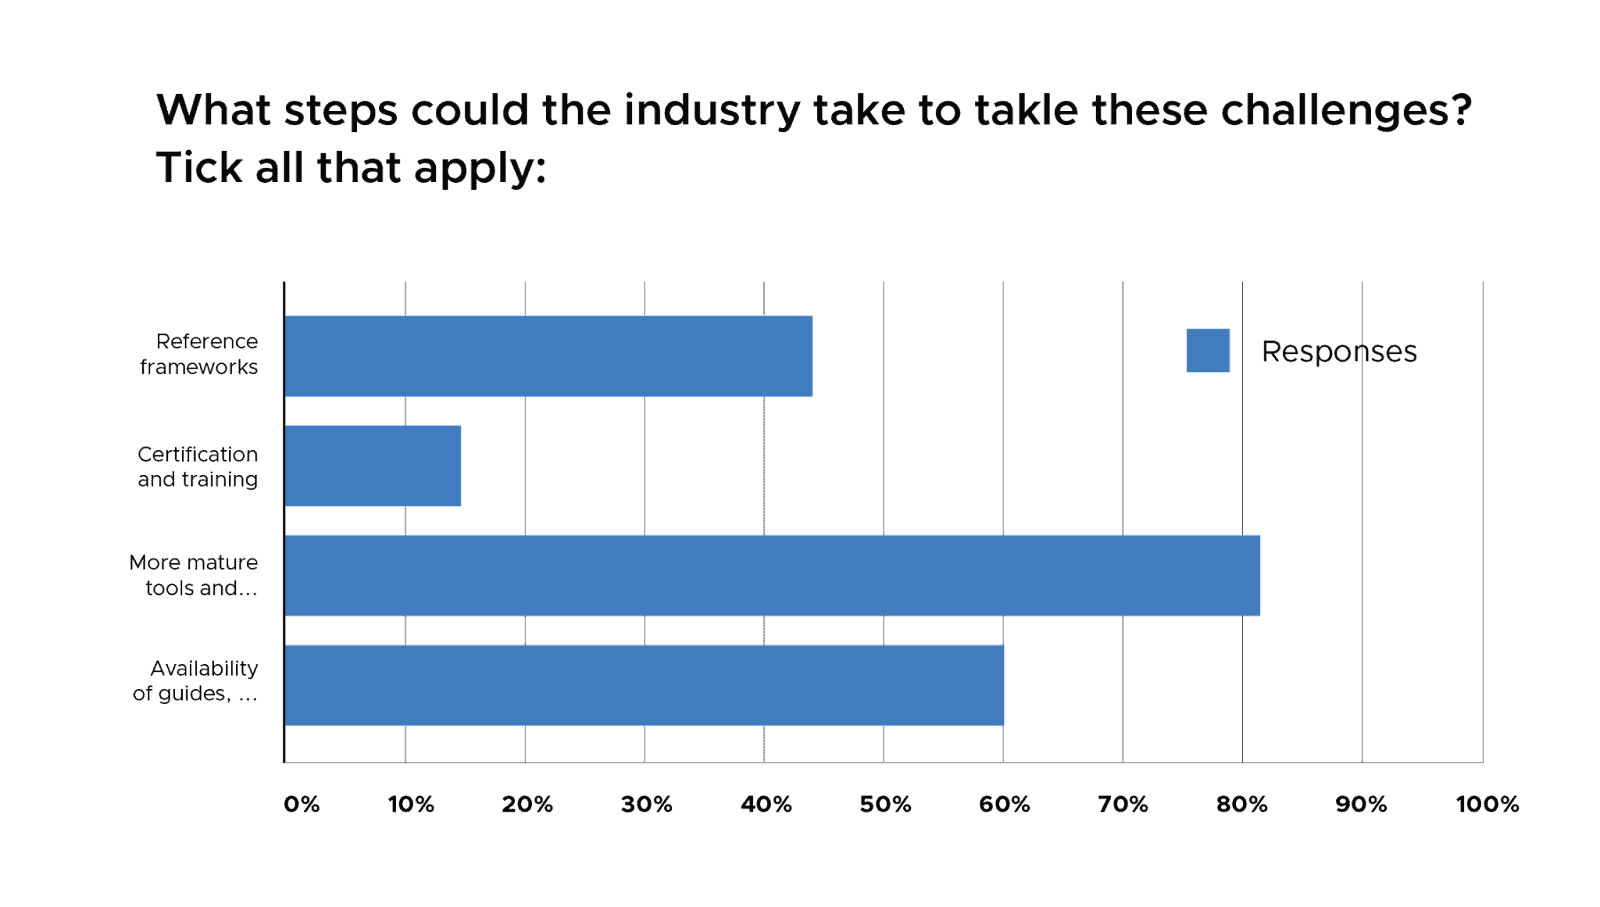 Bar chart showing respondents suggests "more mature tools and..." for the industry to take to takle these challenges